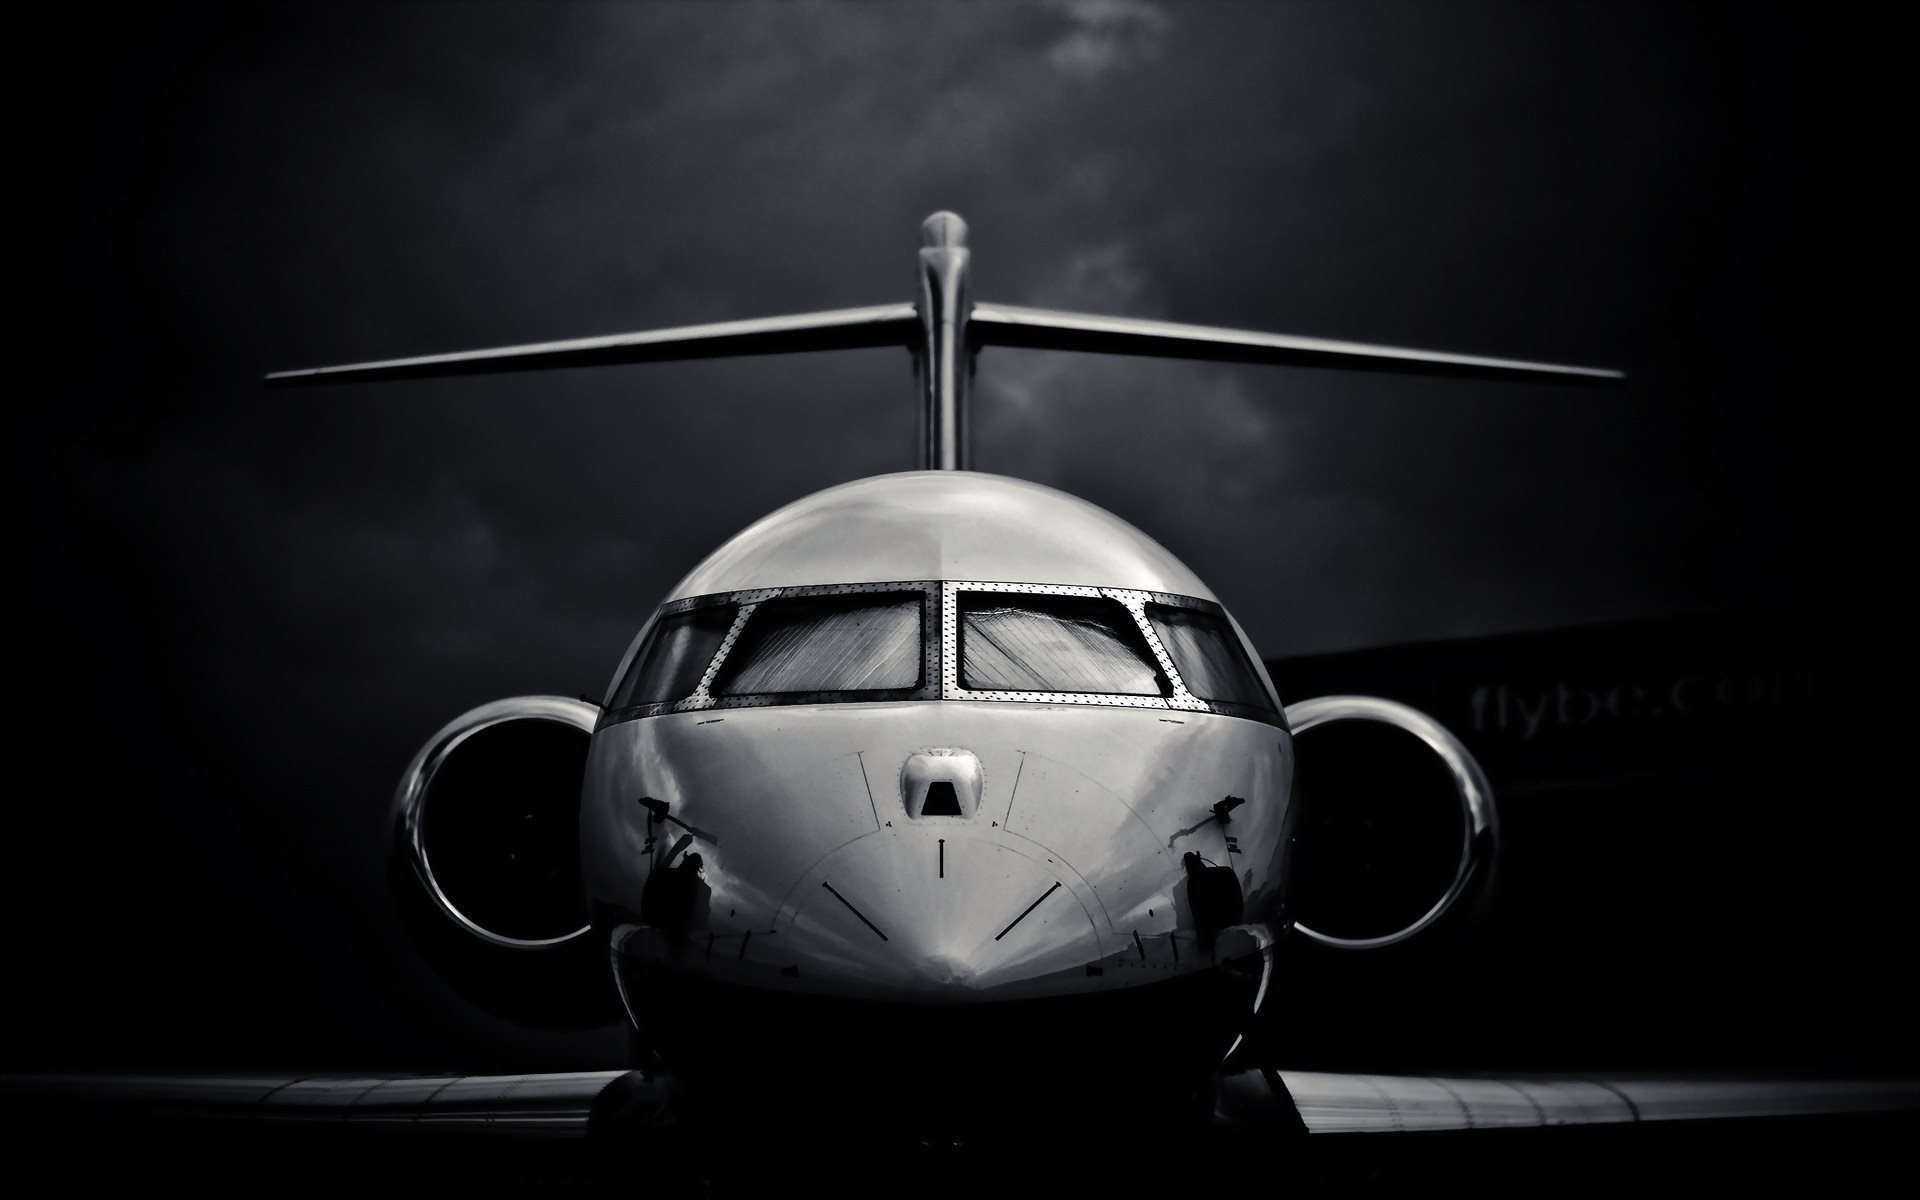 private wallpaper,vehicle,airplane,aviation,mode of transport,aircraft